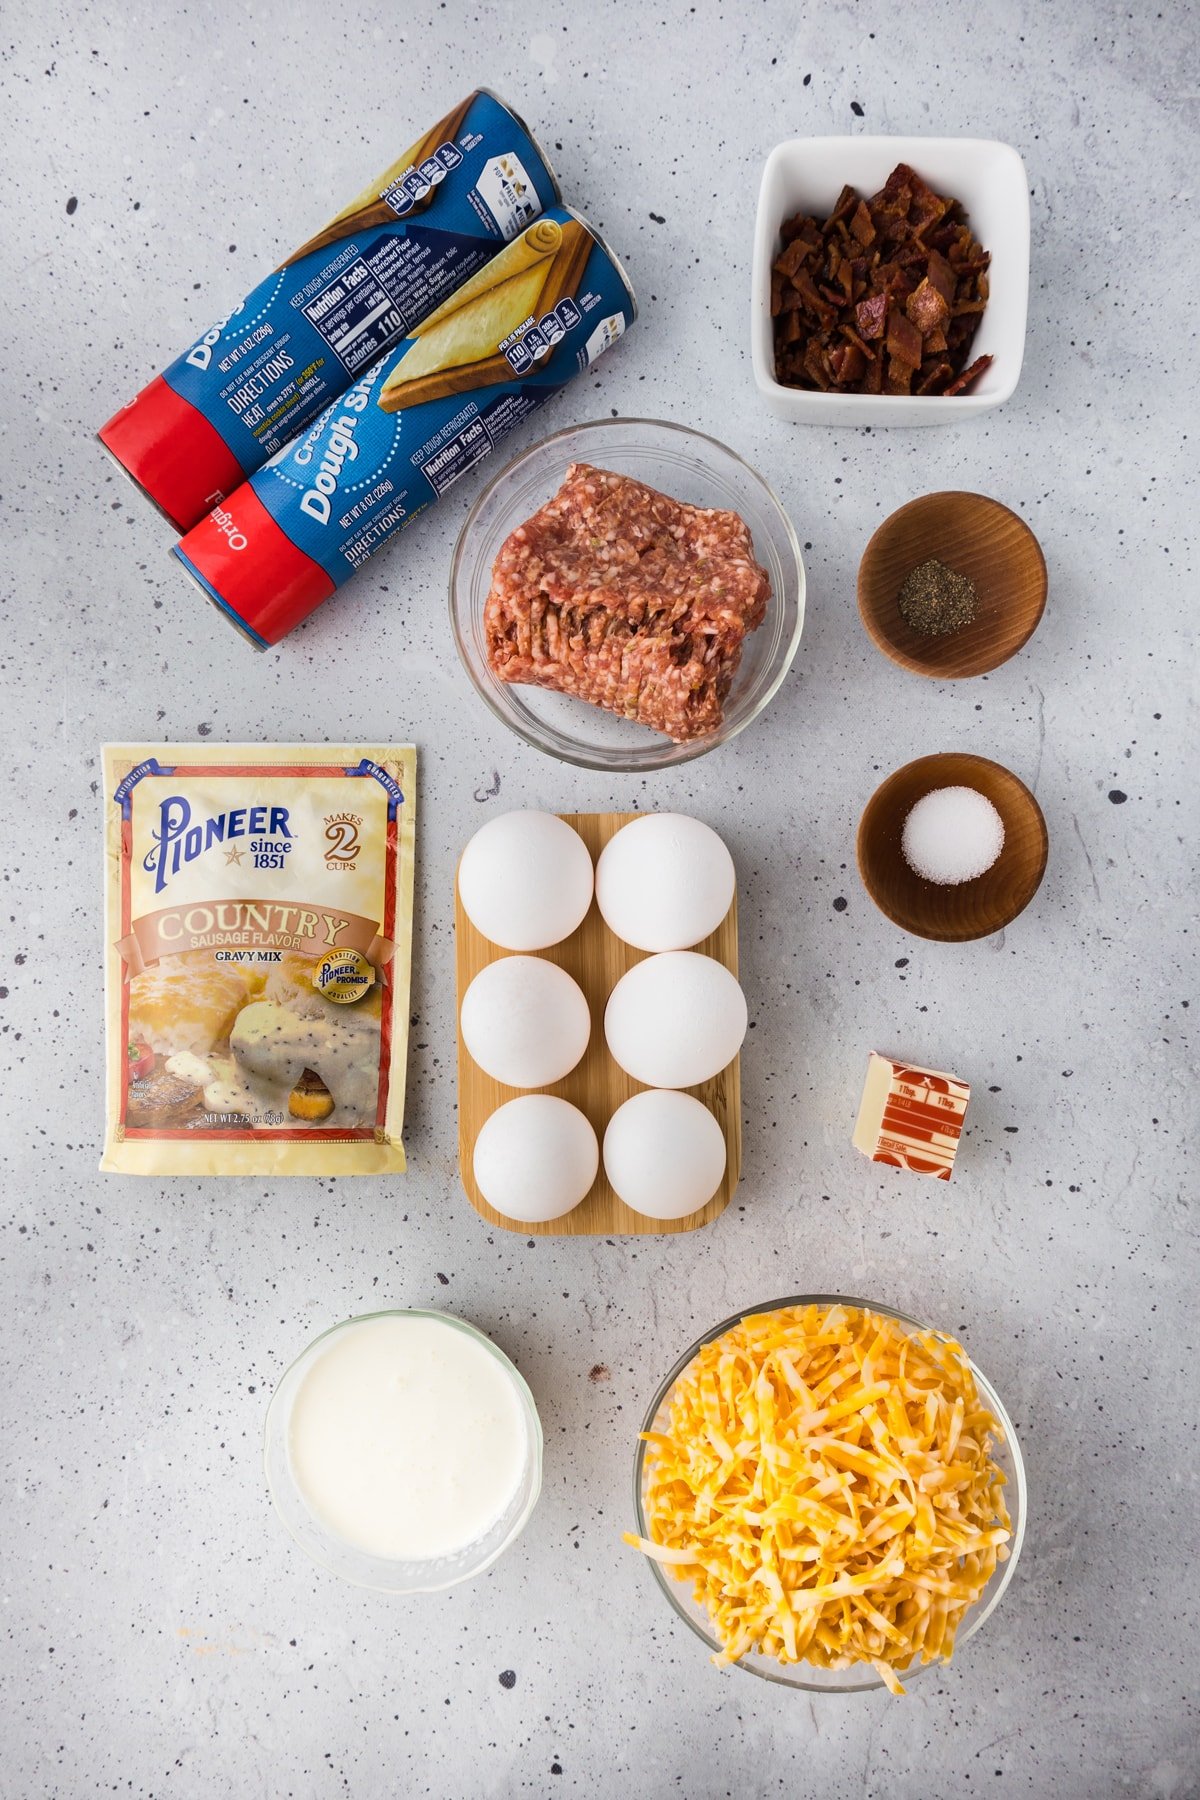 Ingredients to make a breakfast pizza.